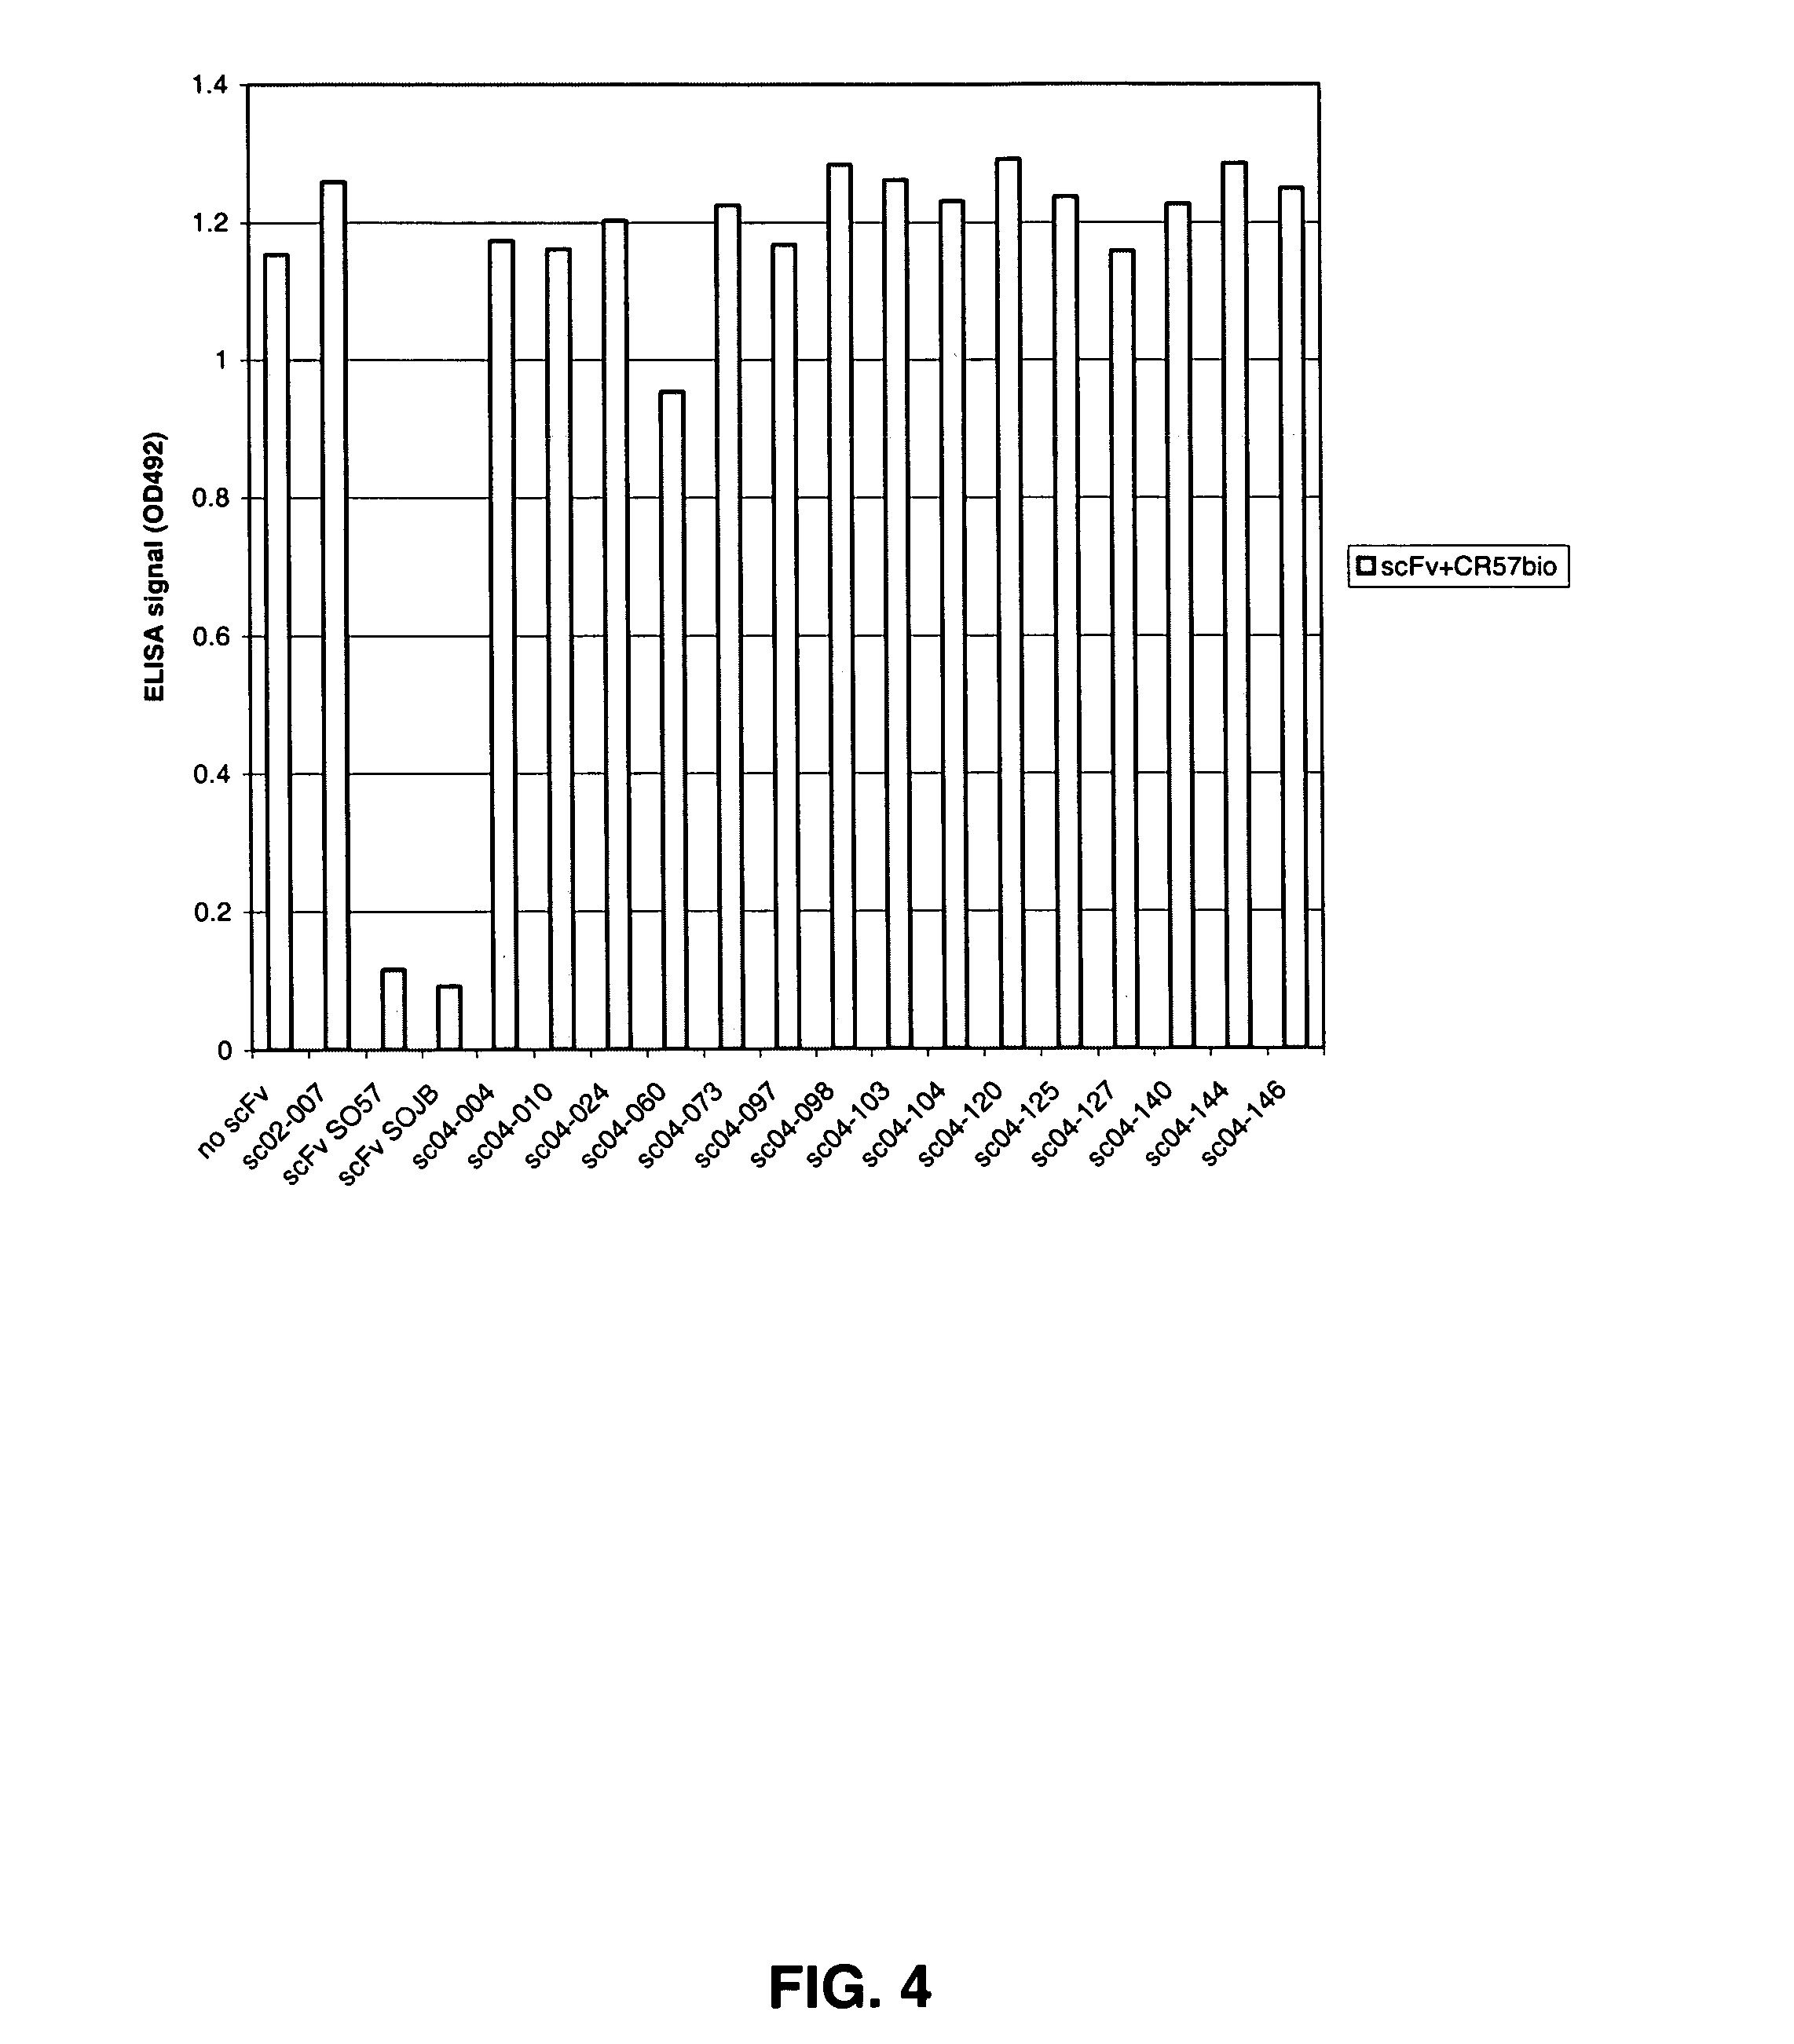 Binding molecules capable of neutralizing rabies virus and uses thereof